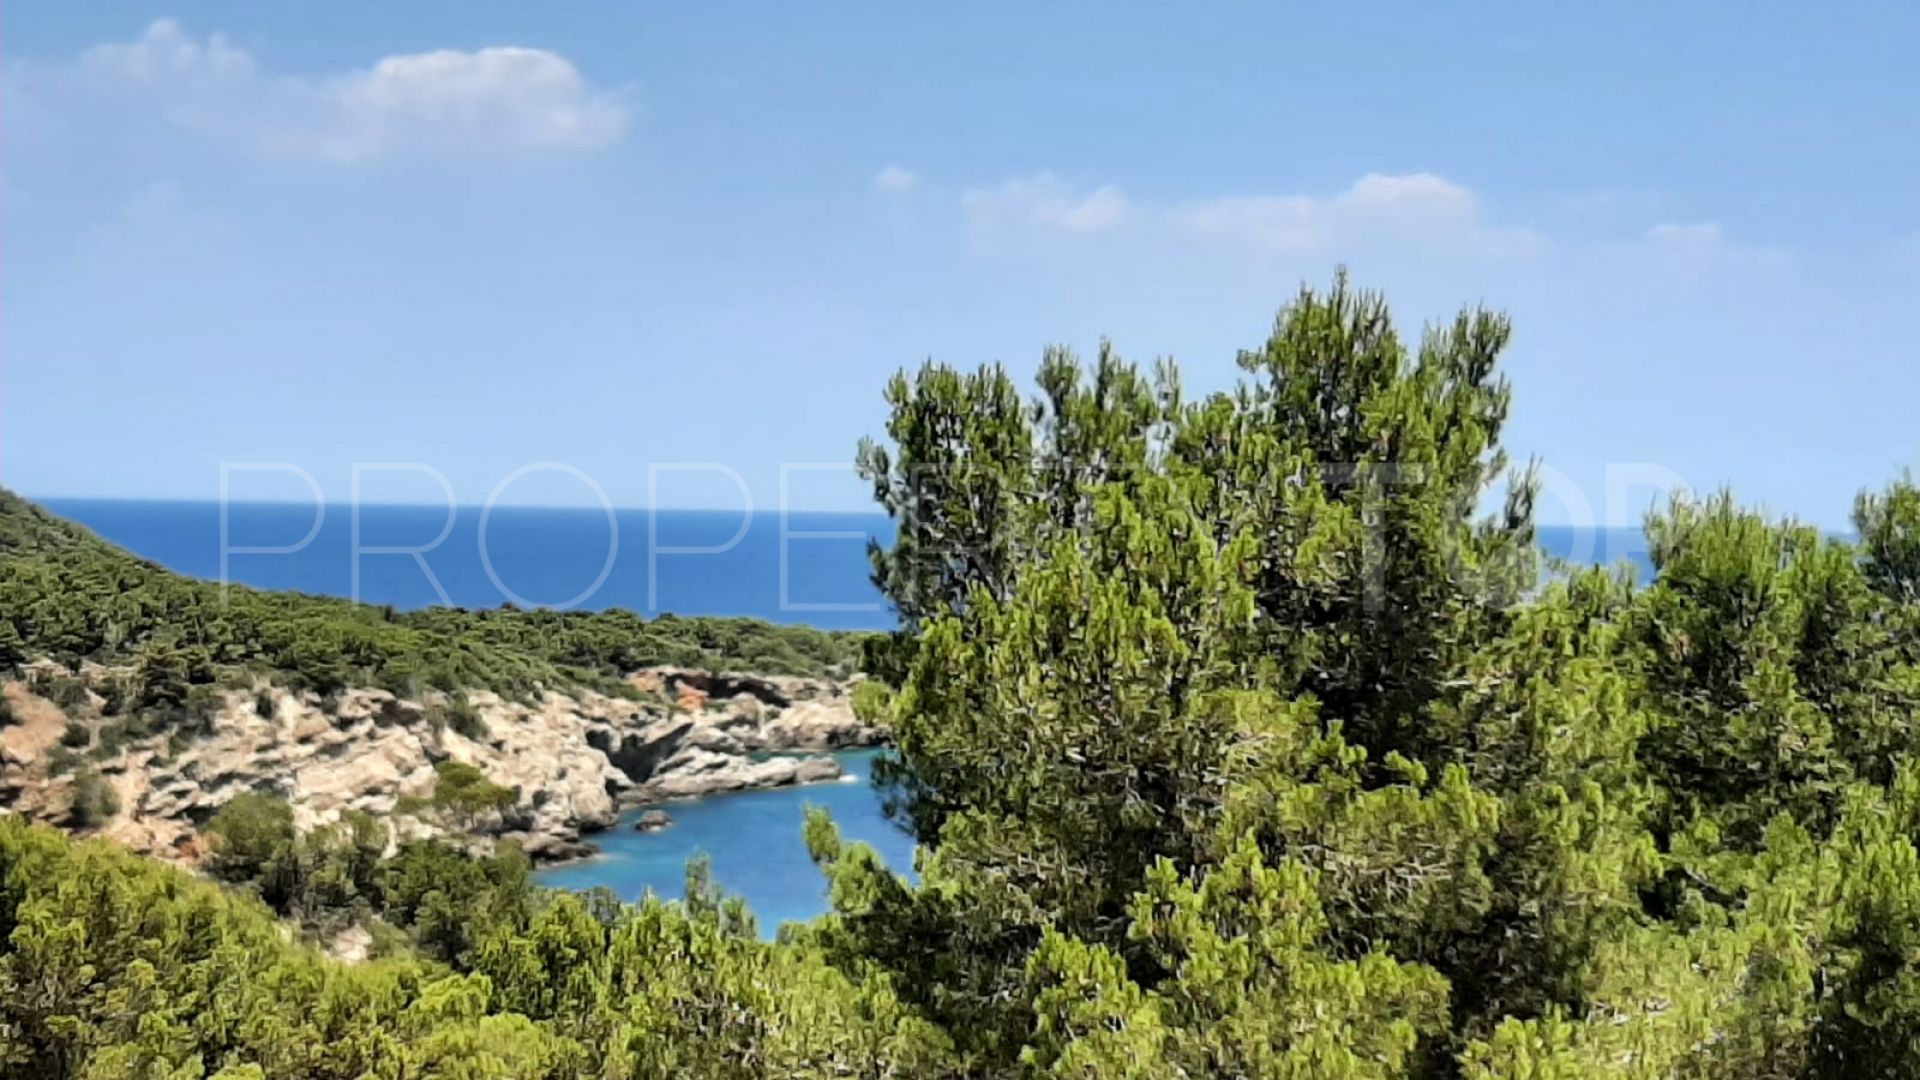 For sale apartment in Cala San Vicente with 1 bedroom